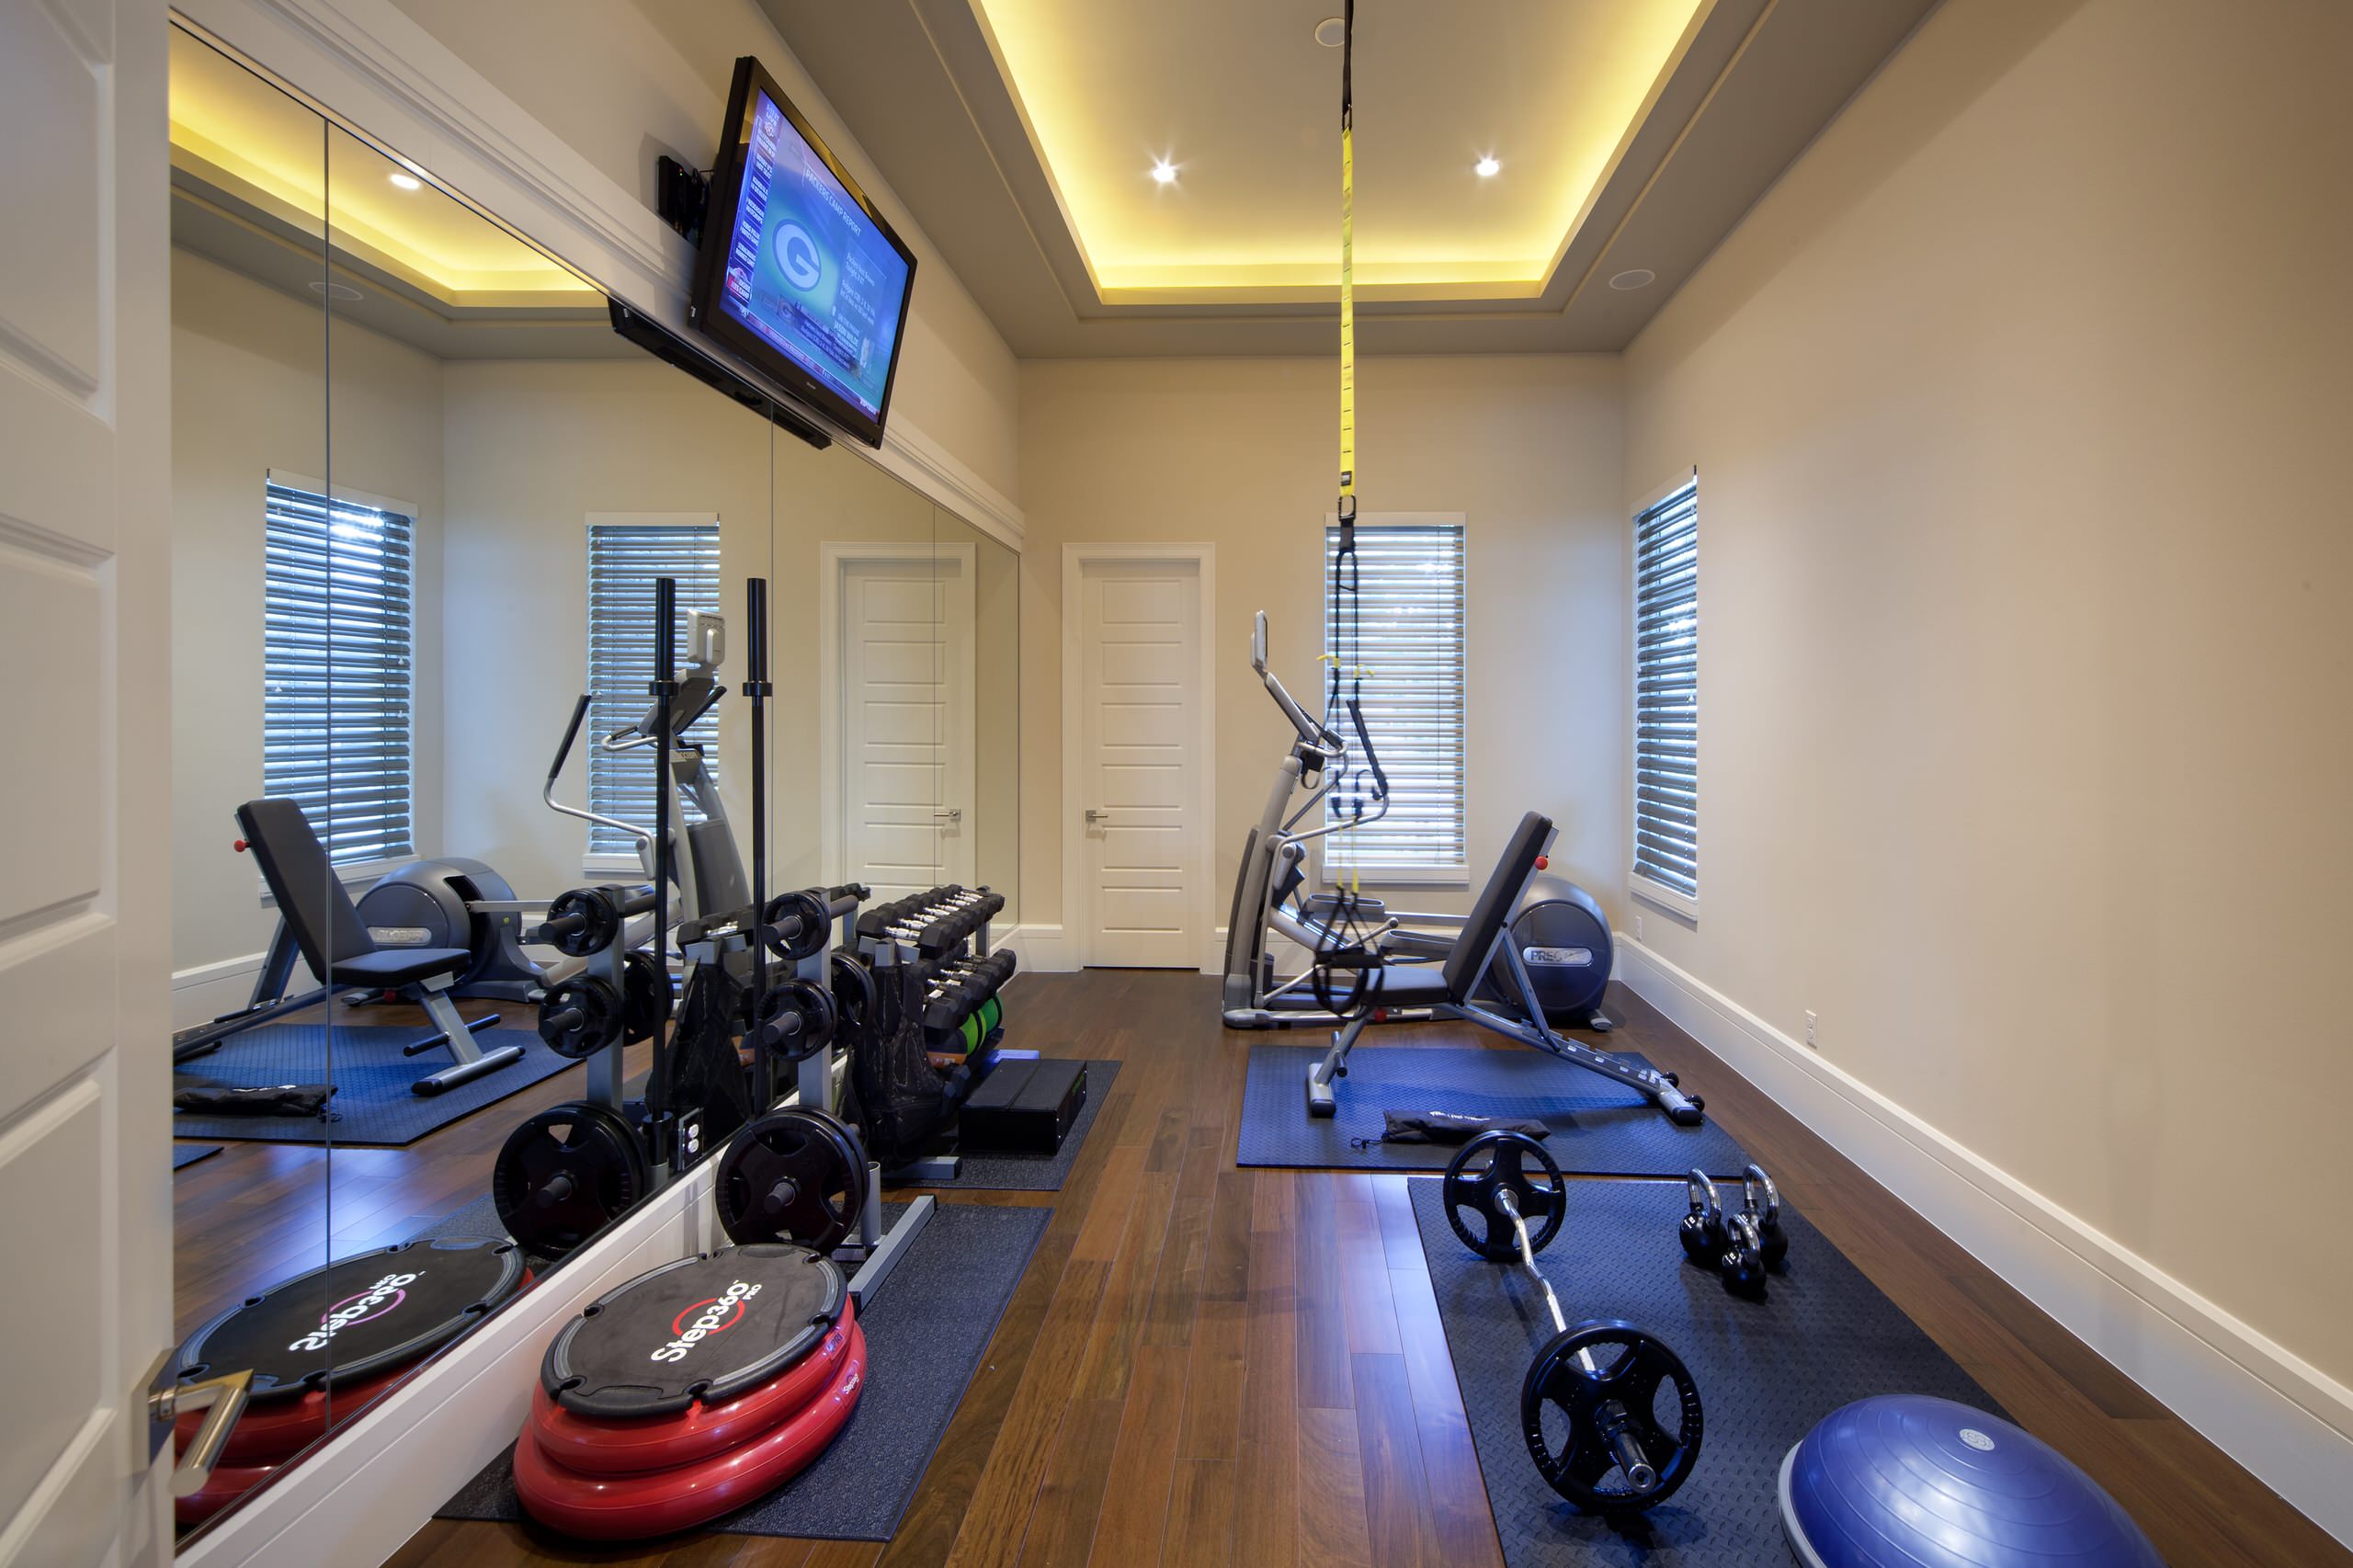 75 Beautiful Home Gym Pictures Ideas December 2020 Houzz